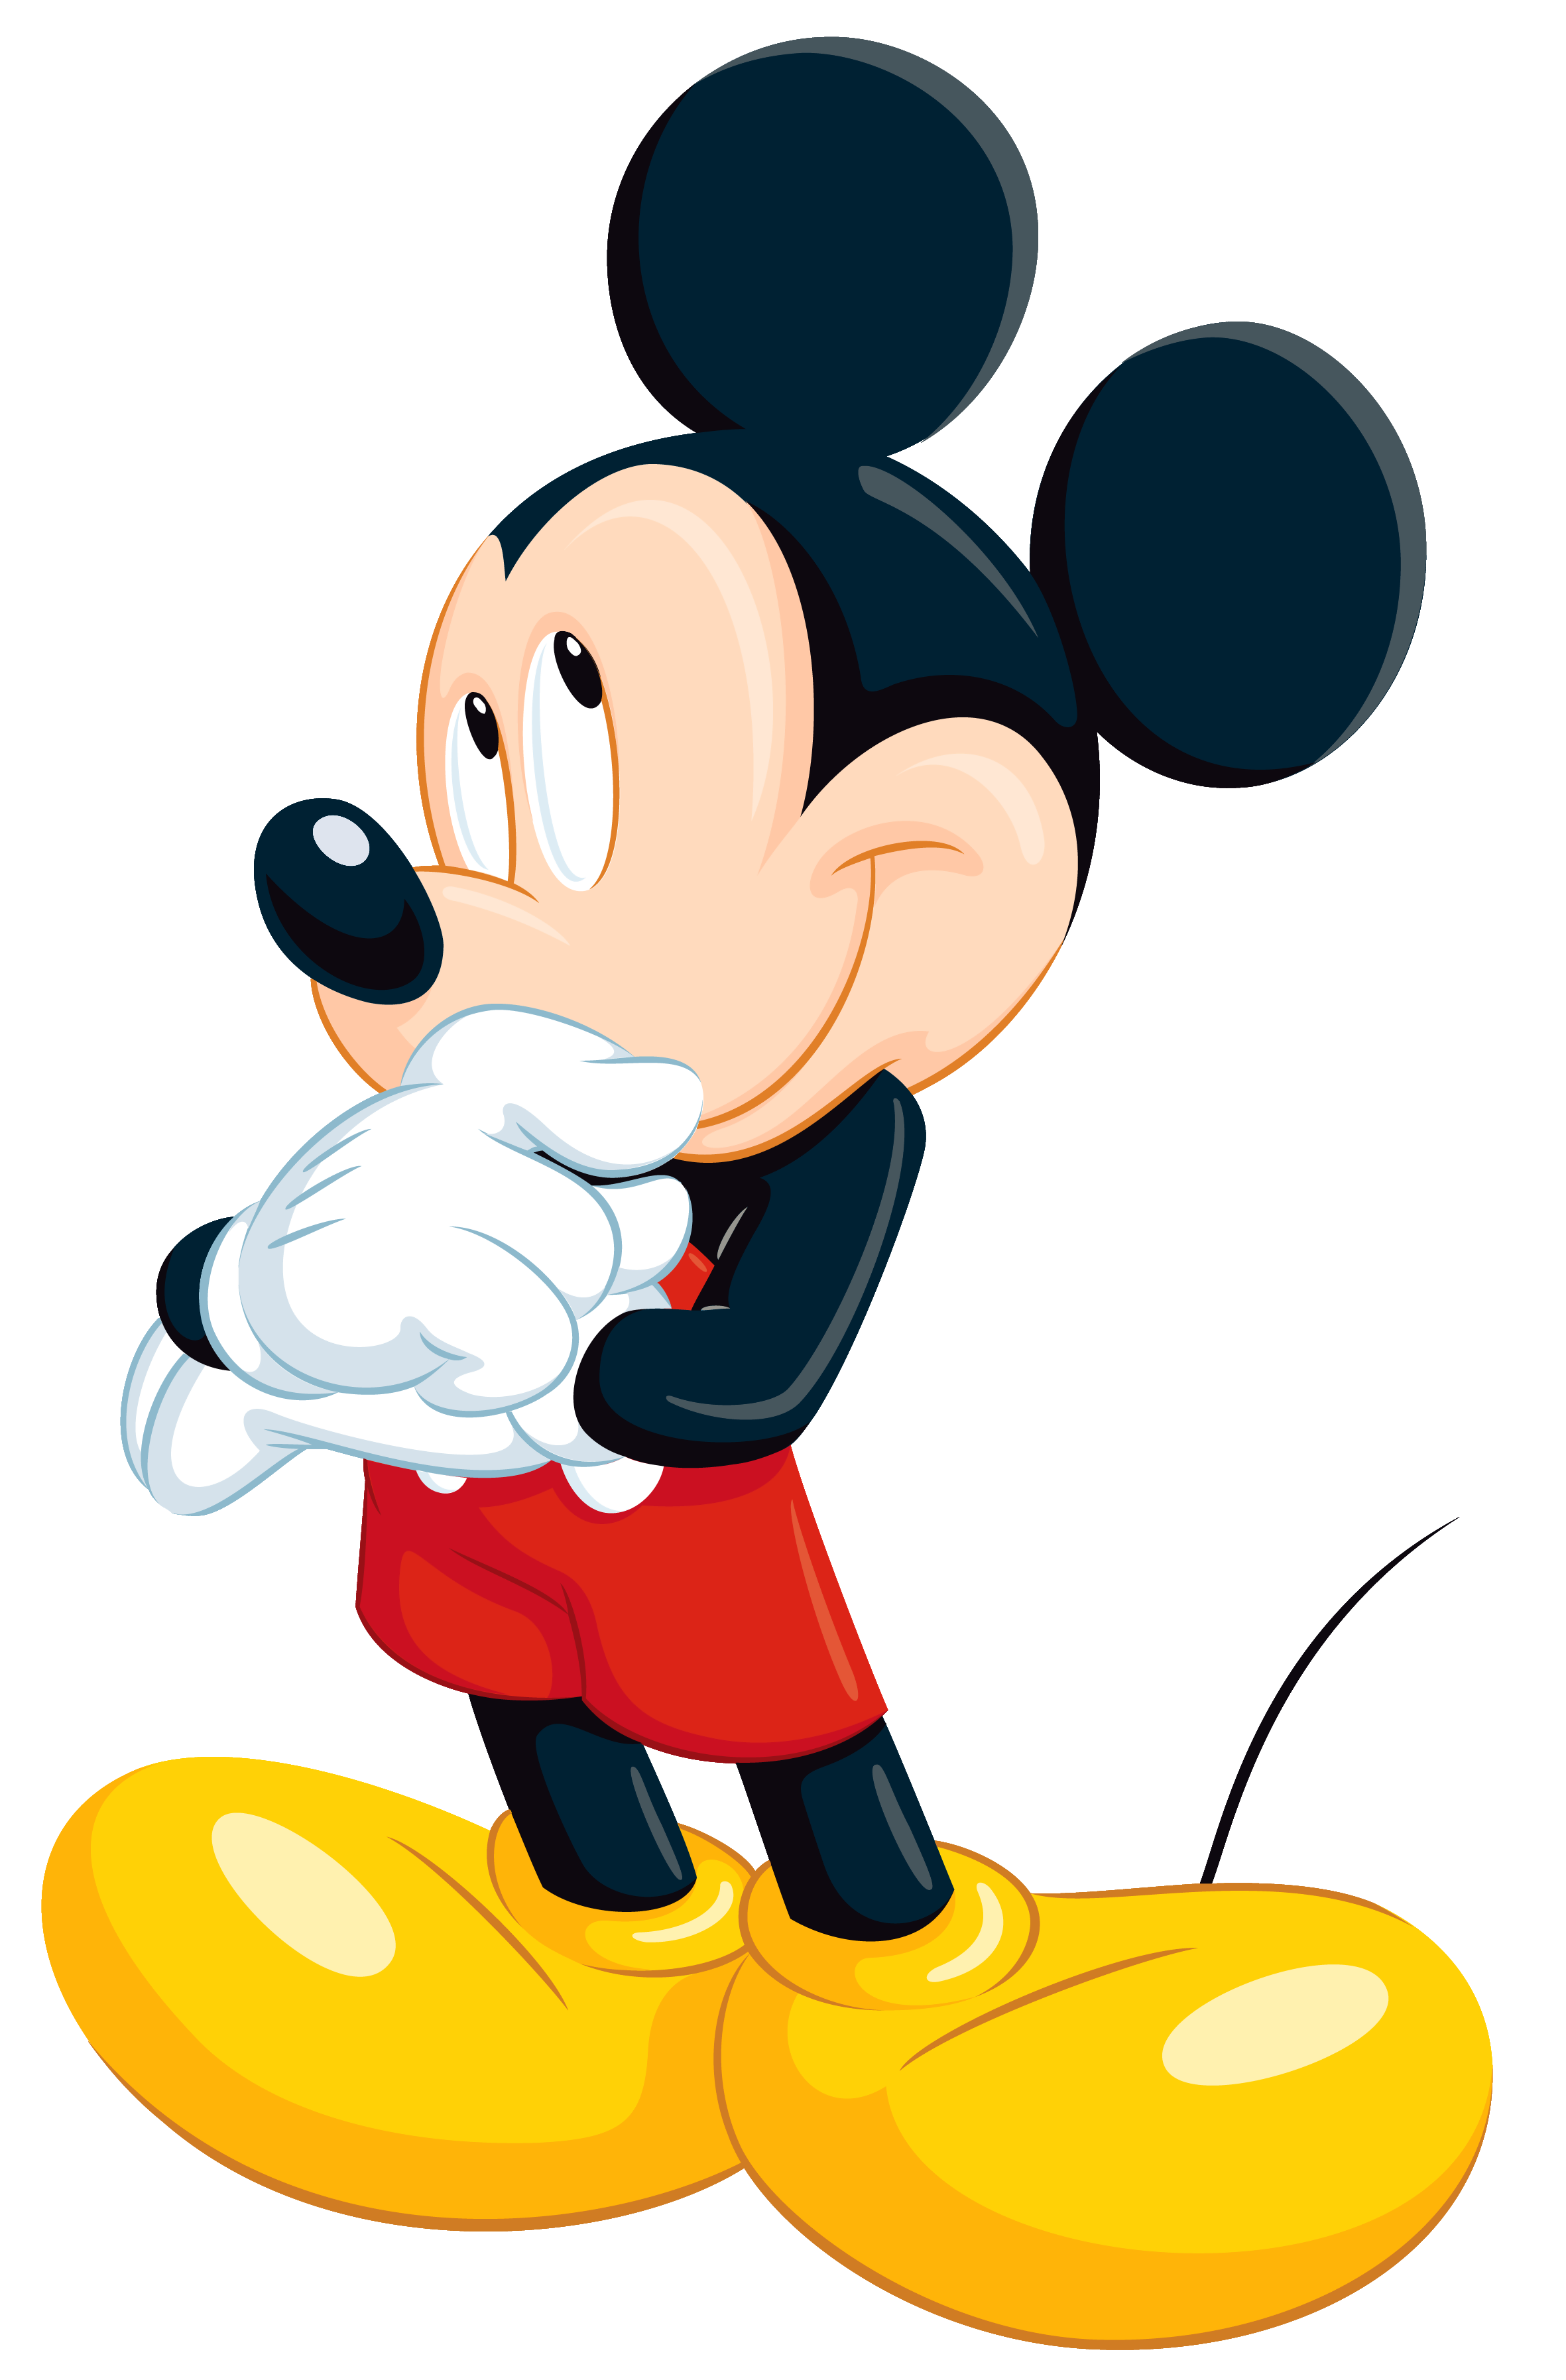 Mickey mouse png images. Free download